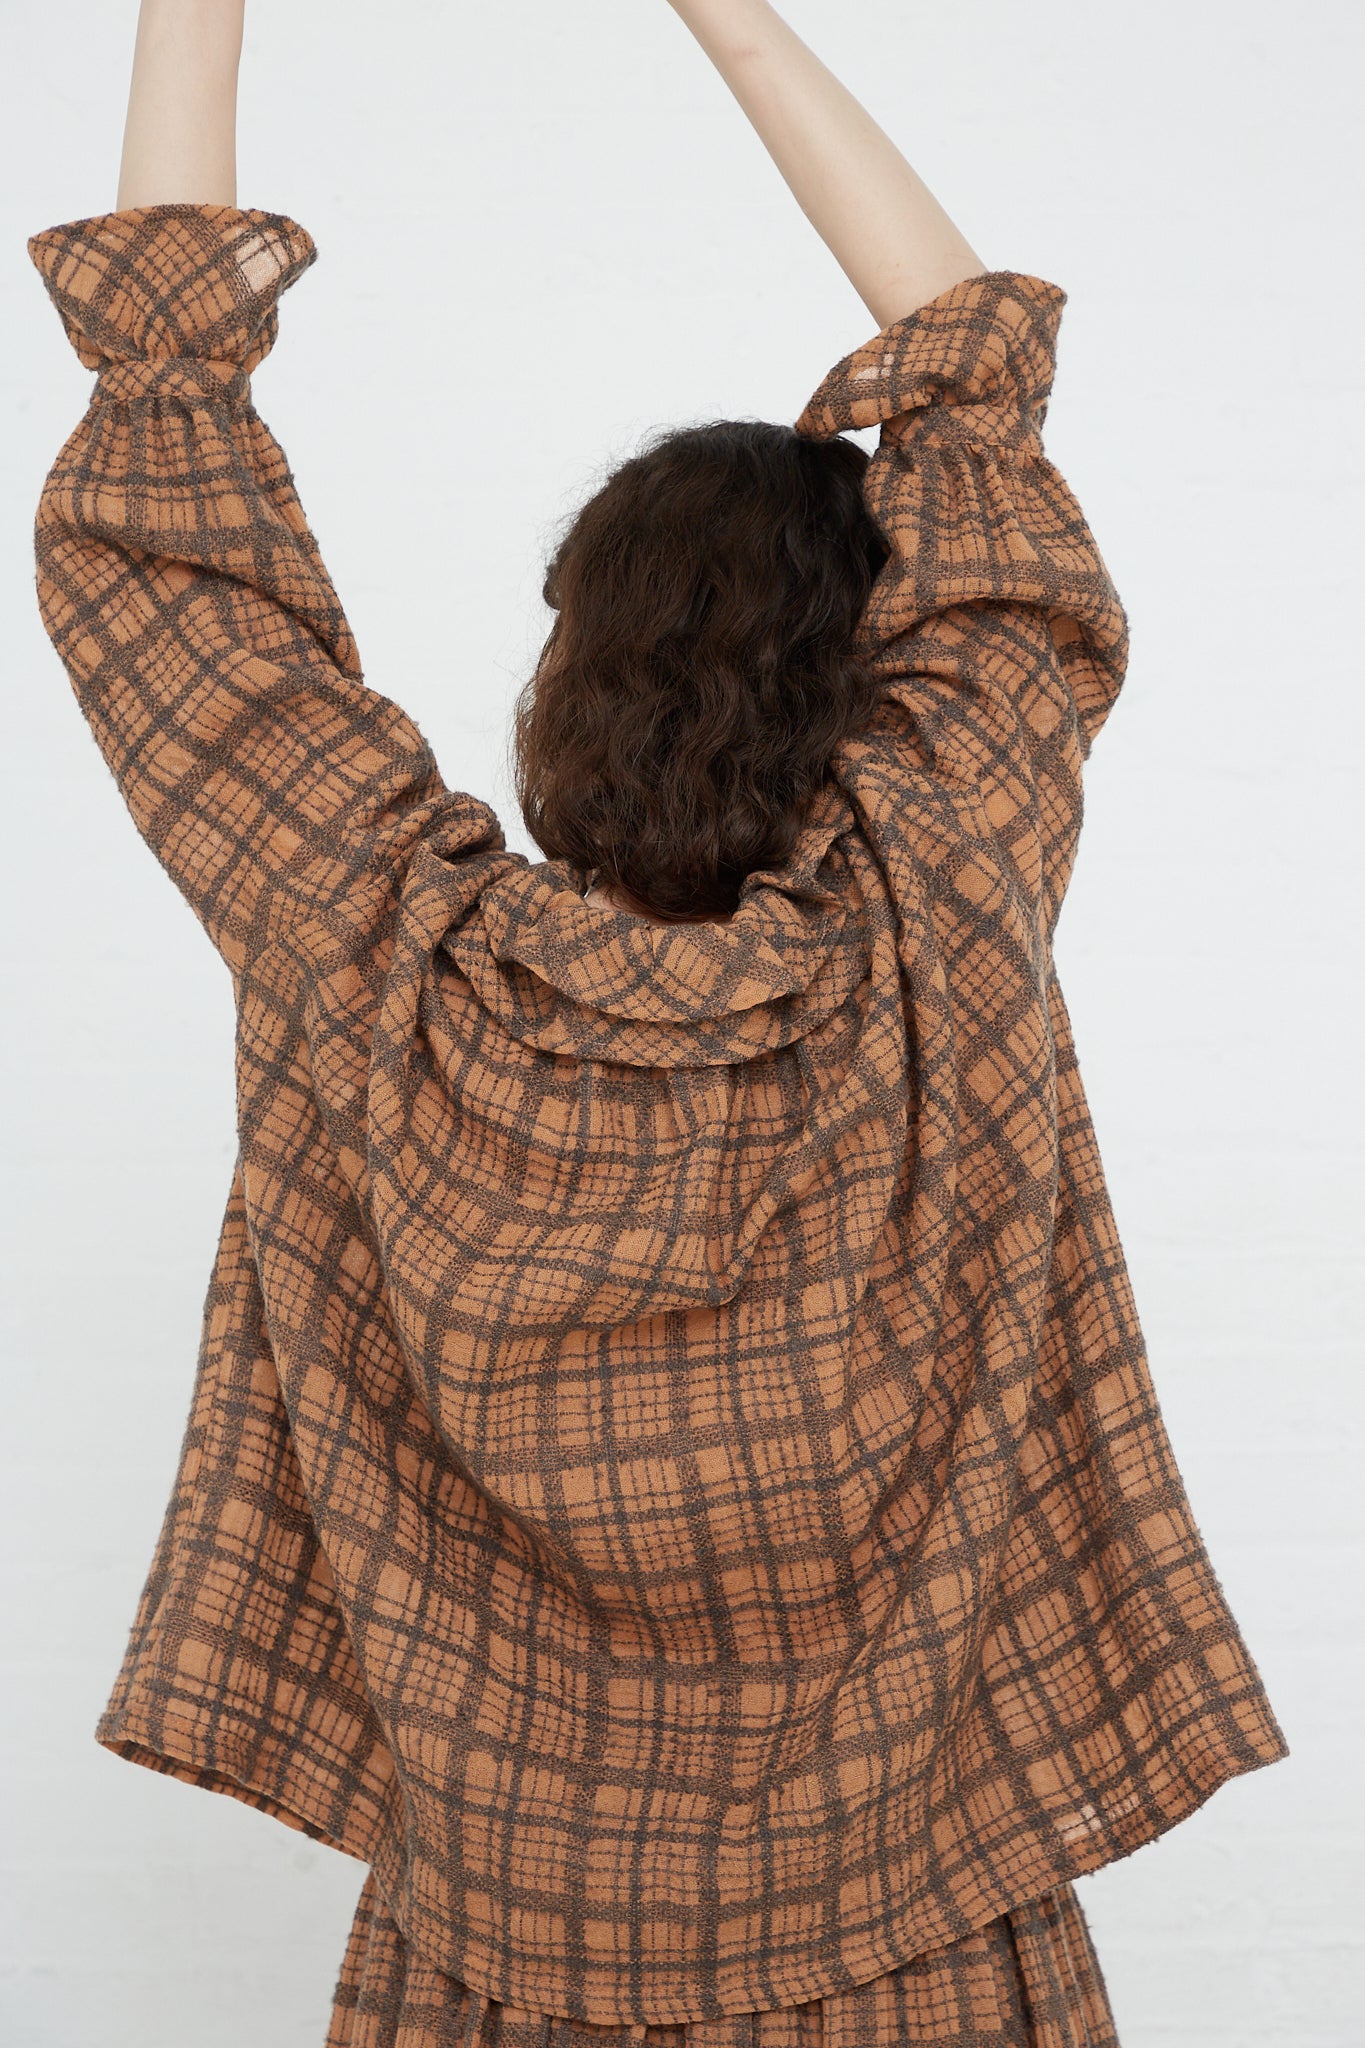 A woman in a relaxed fit Wool Check Frill Blouse in Terracotta by Ichi Antiquités, with her arms up.